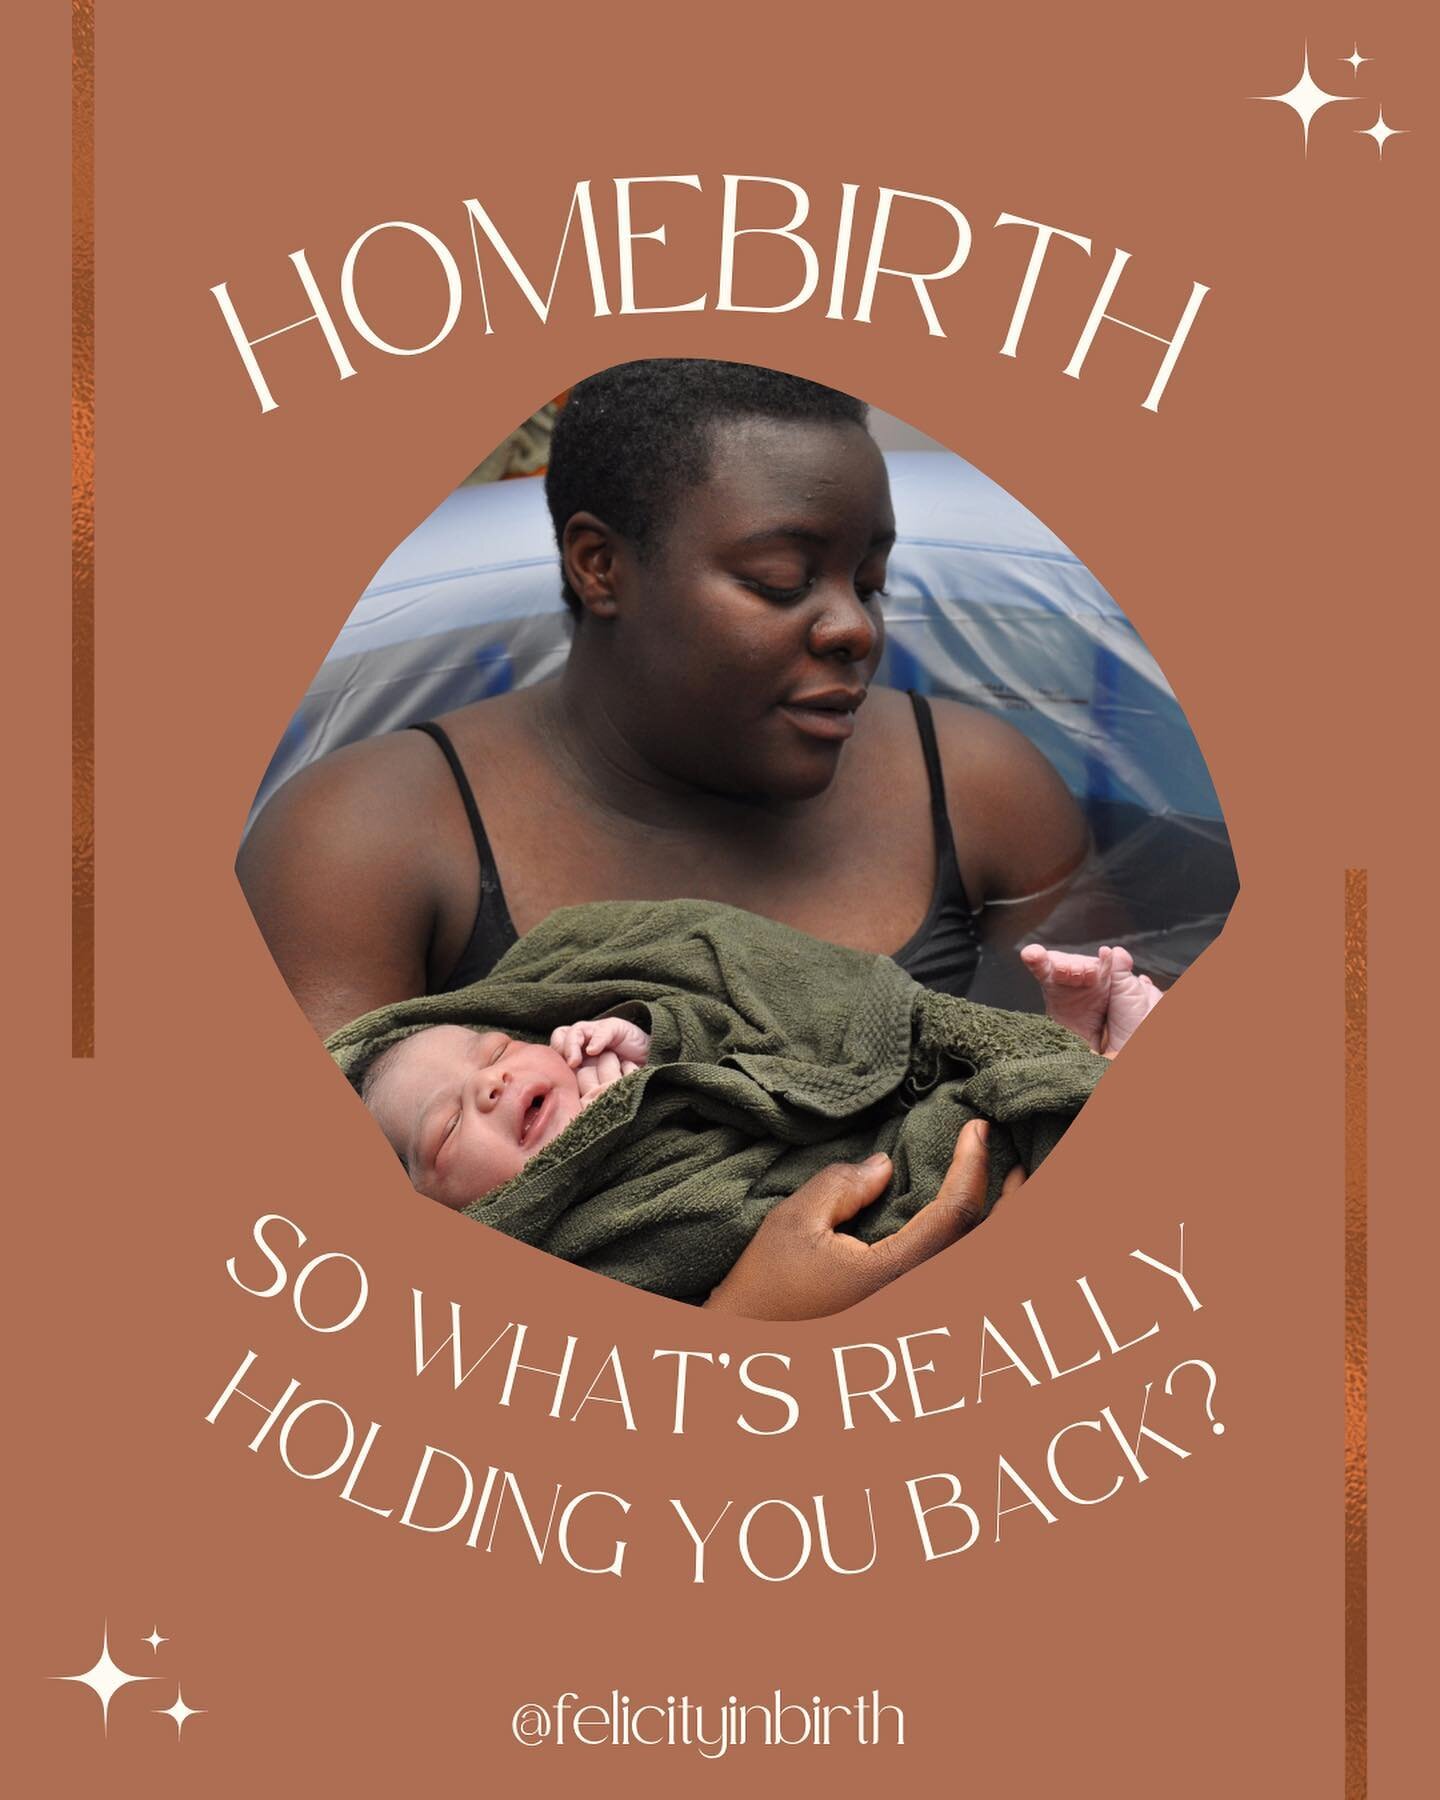 Have you been honest with yourself about what&rsquo;s holding you back from claiming your homebirth?

You have the info, you know you want it&hellip;but there&rsquo;s somethings left to work through that you can&rsquo;t seem to overcome yet.

Is it s